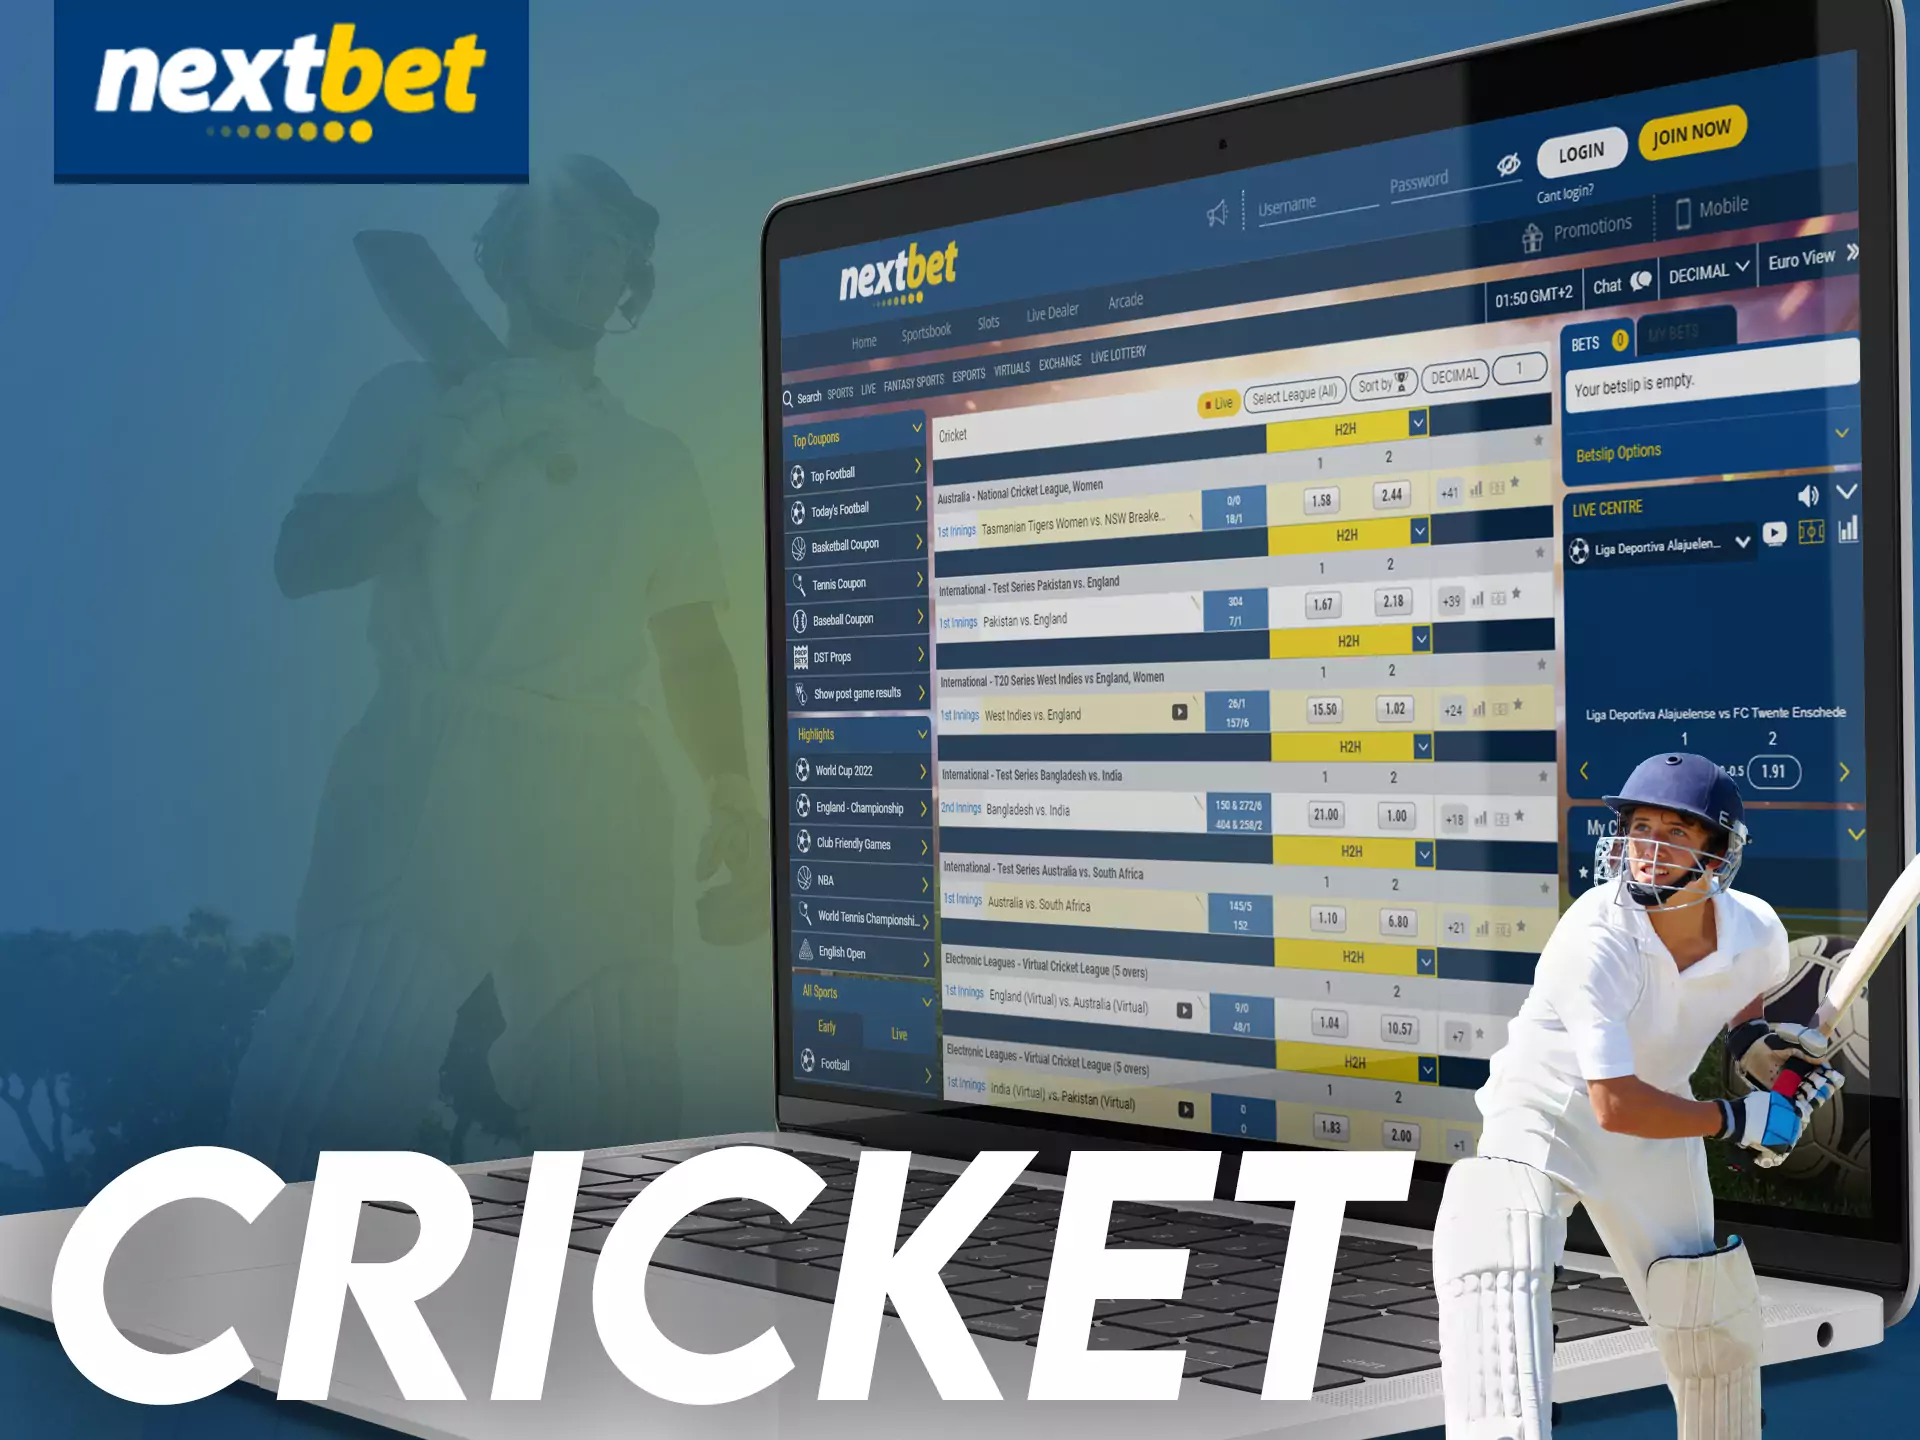 If you are a cricket fan, you can bet on this sport in Nextbet.